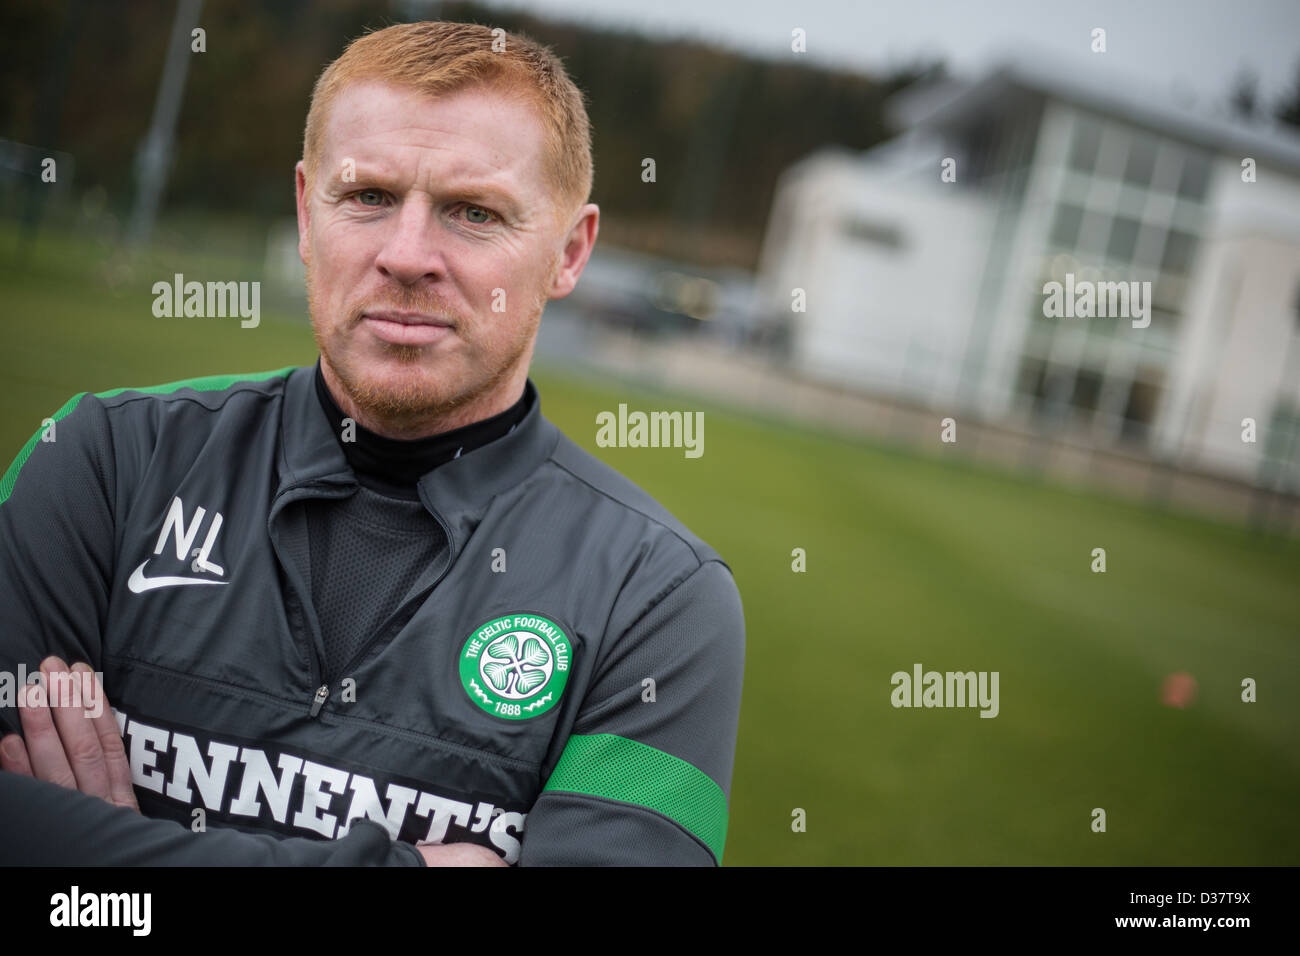 Neil Lennon Manager Of Celtic Fc Photographed At The Celtic Training Grounds In Lennonxtown Near Glasgow Scotland Stock Photo Alamy